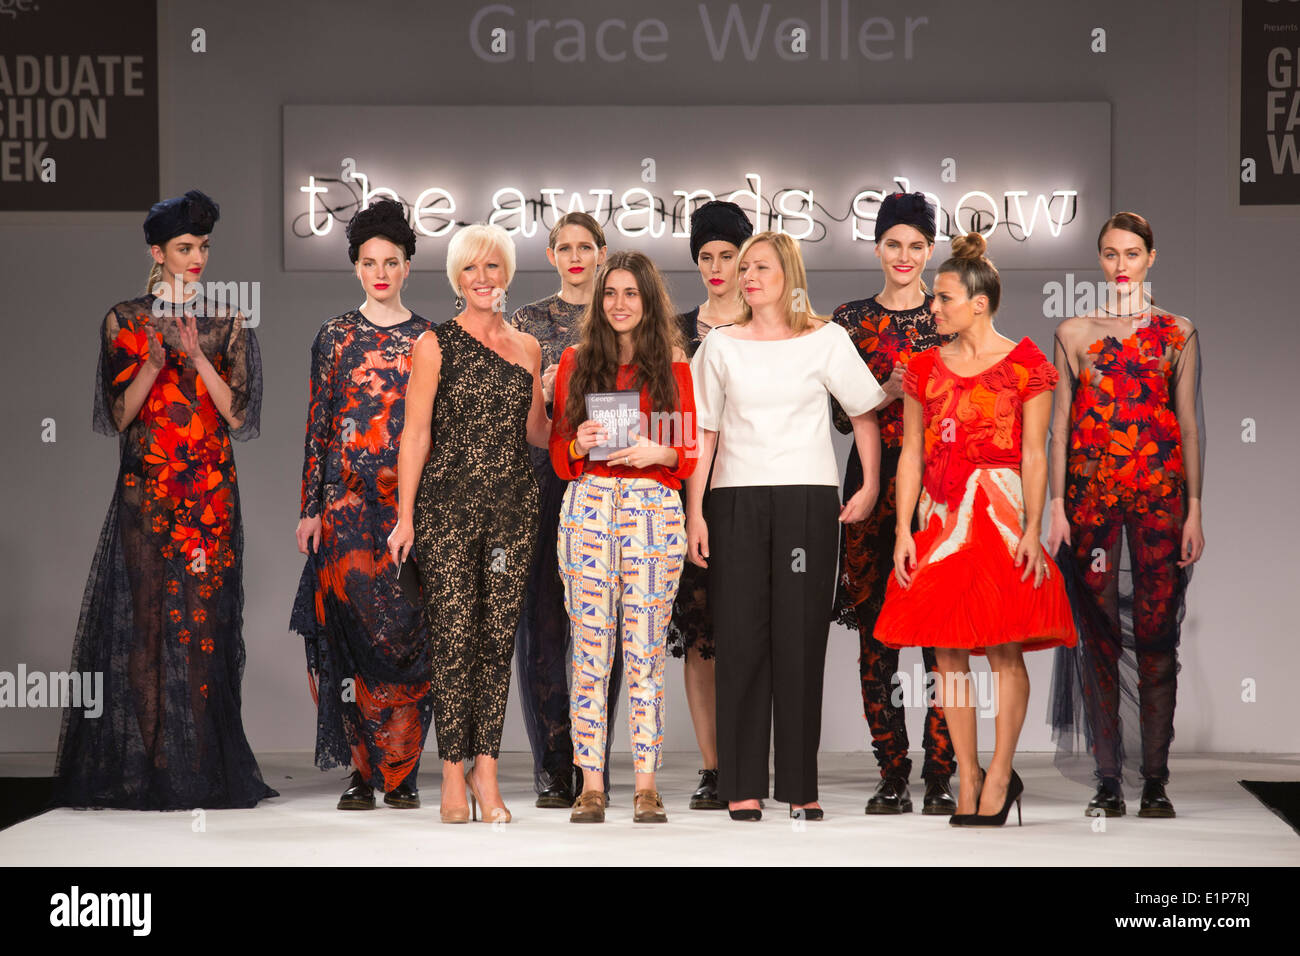 George Gold Award Winner Grace Weller with her collection at Graduate Fashion Week 2014 Stock Photo